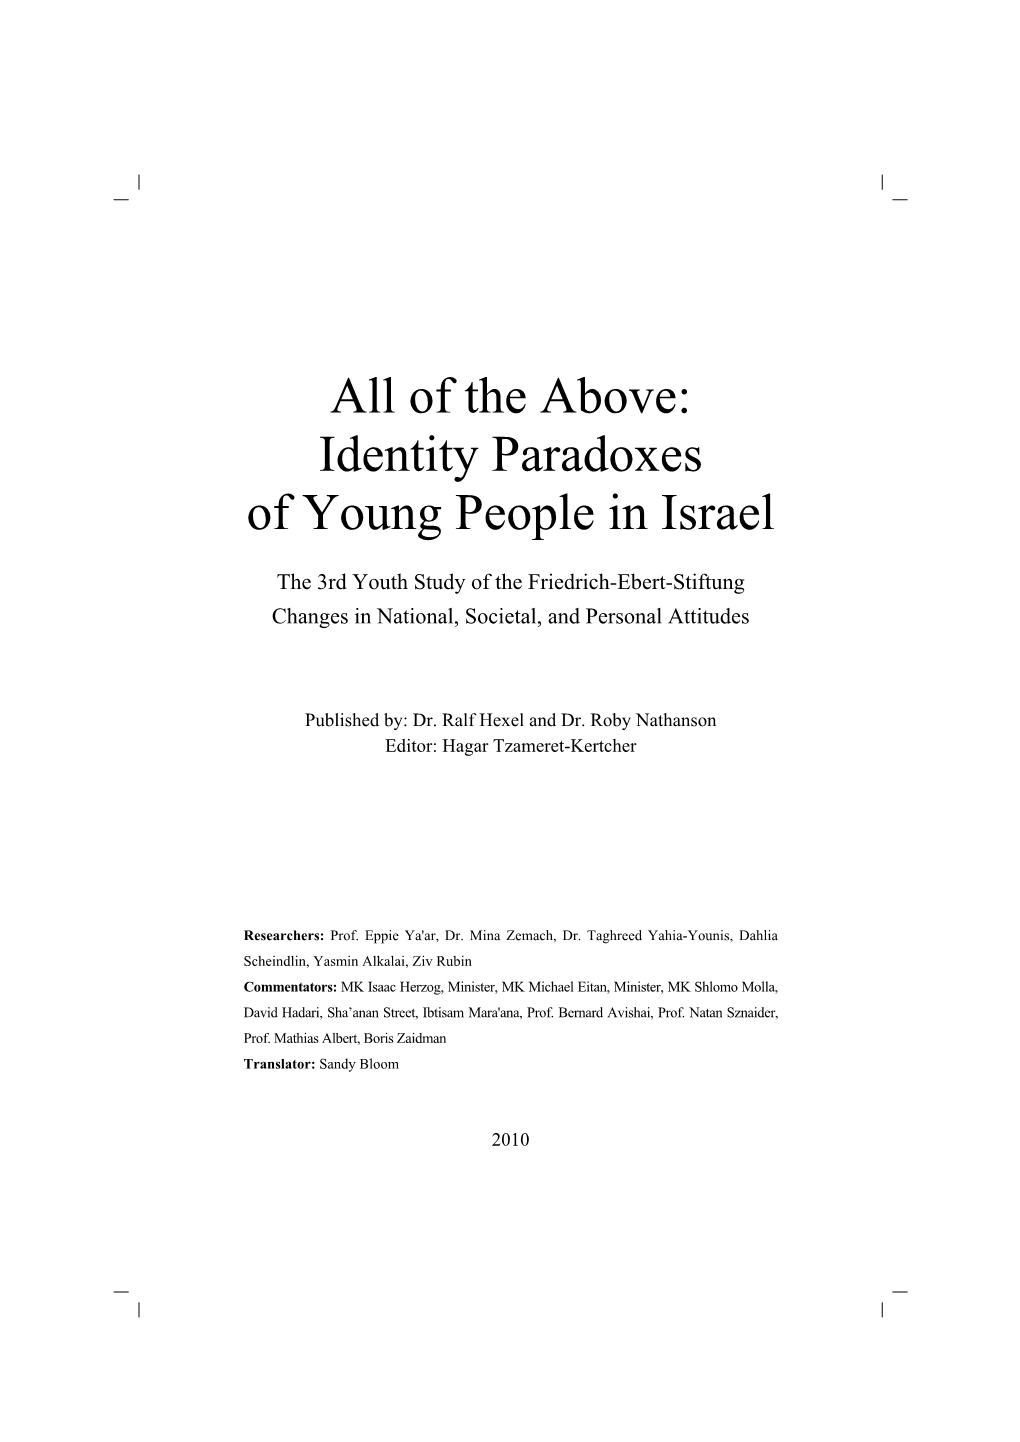 All of the Above: Identity Paradoxes of Young People in Israel